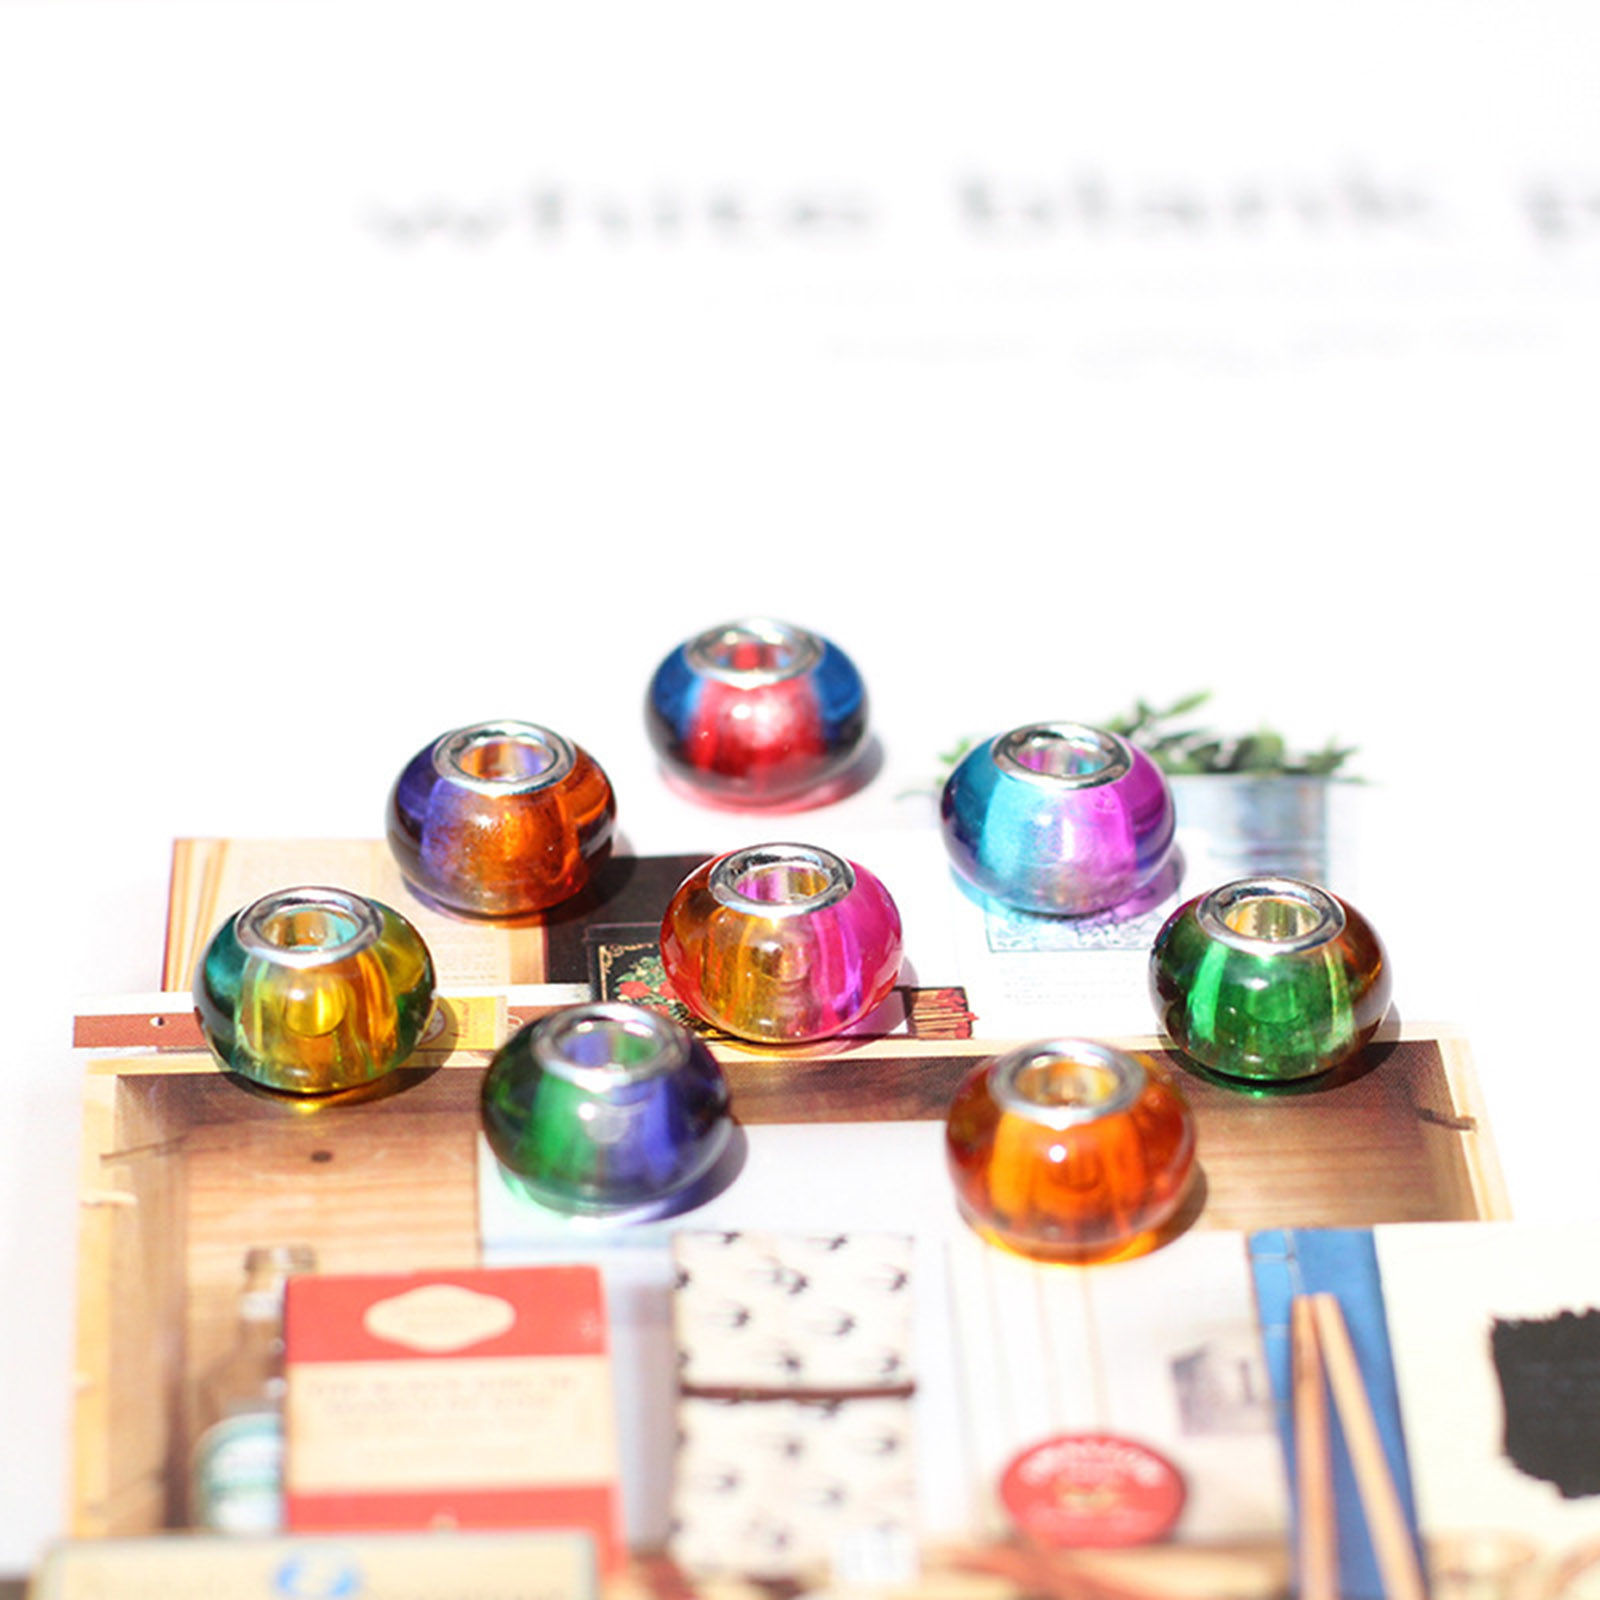 Picture of Resin European Style Large Hole Charm Beads Multicolor Round Gradient Color 14mm x 9mm